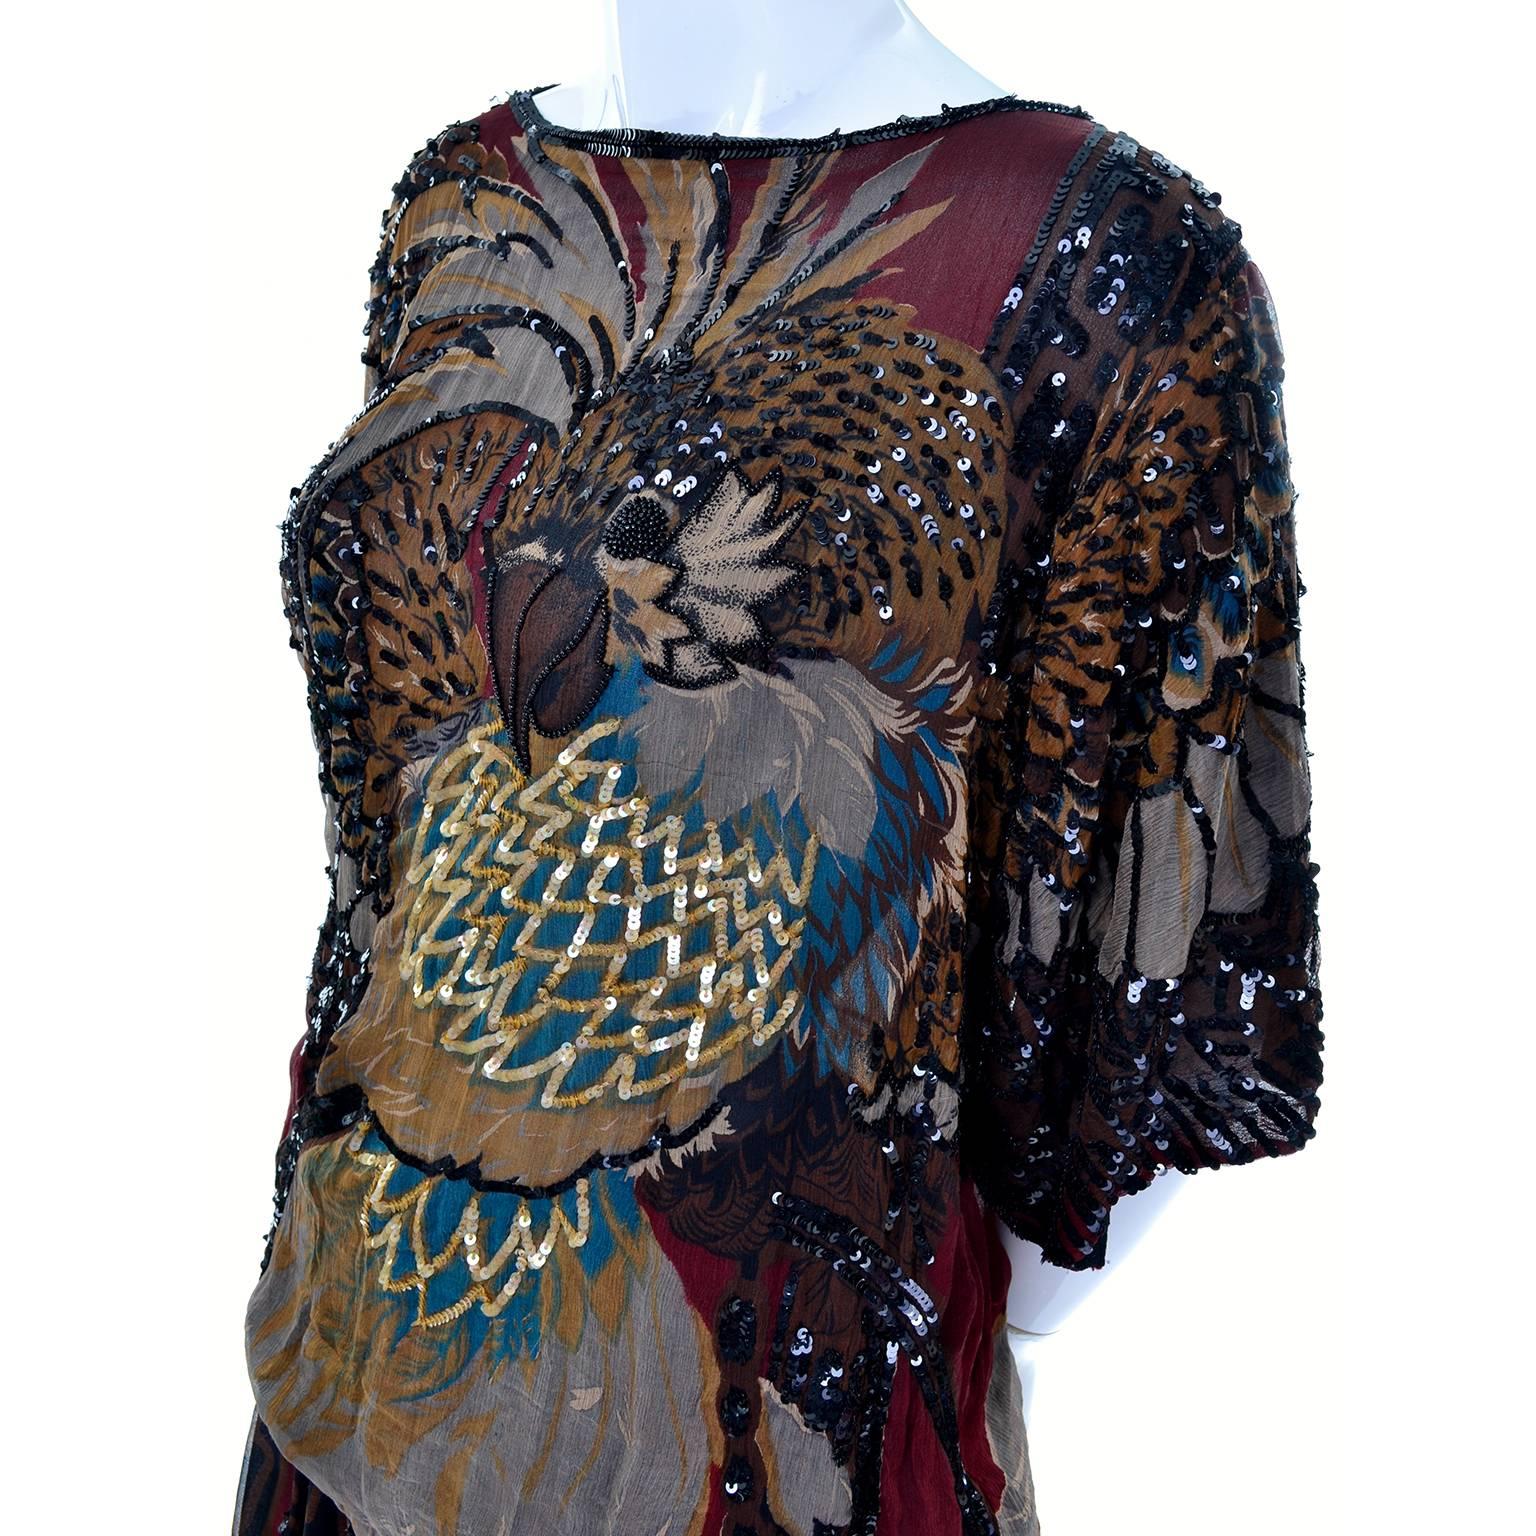 This is an exquisite silk 2 piece ensemble from Adolfo with a gorgeous top with beads and sequins with the images of an eagle and feathers on both the front and the back.  This ensemble is a perfect example of how to mix patterns properly, with the